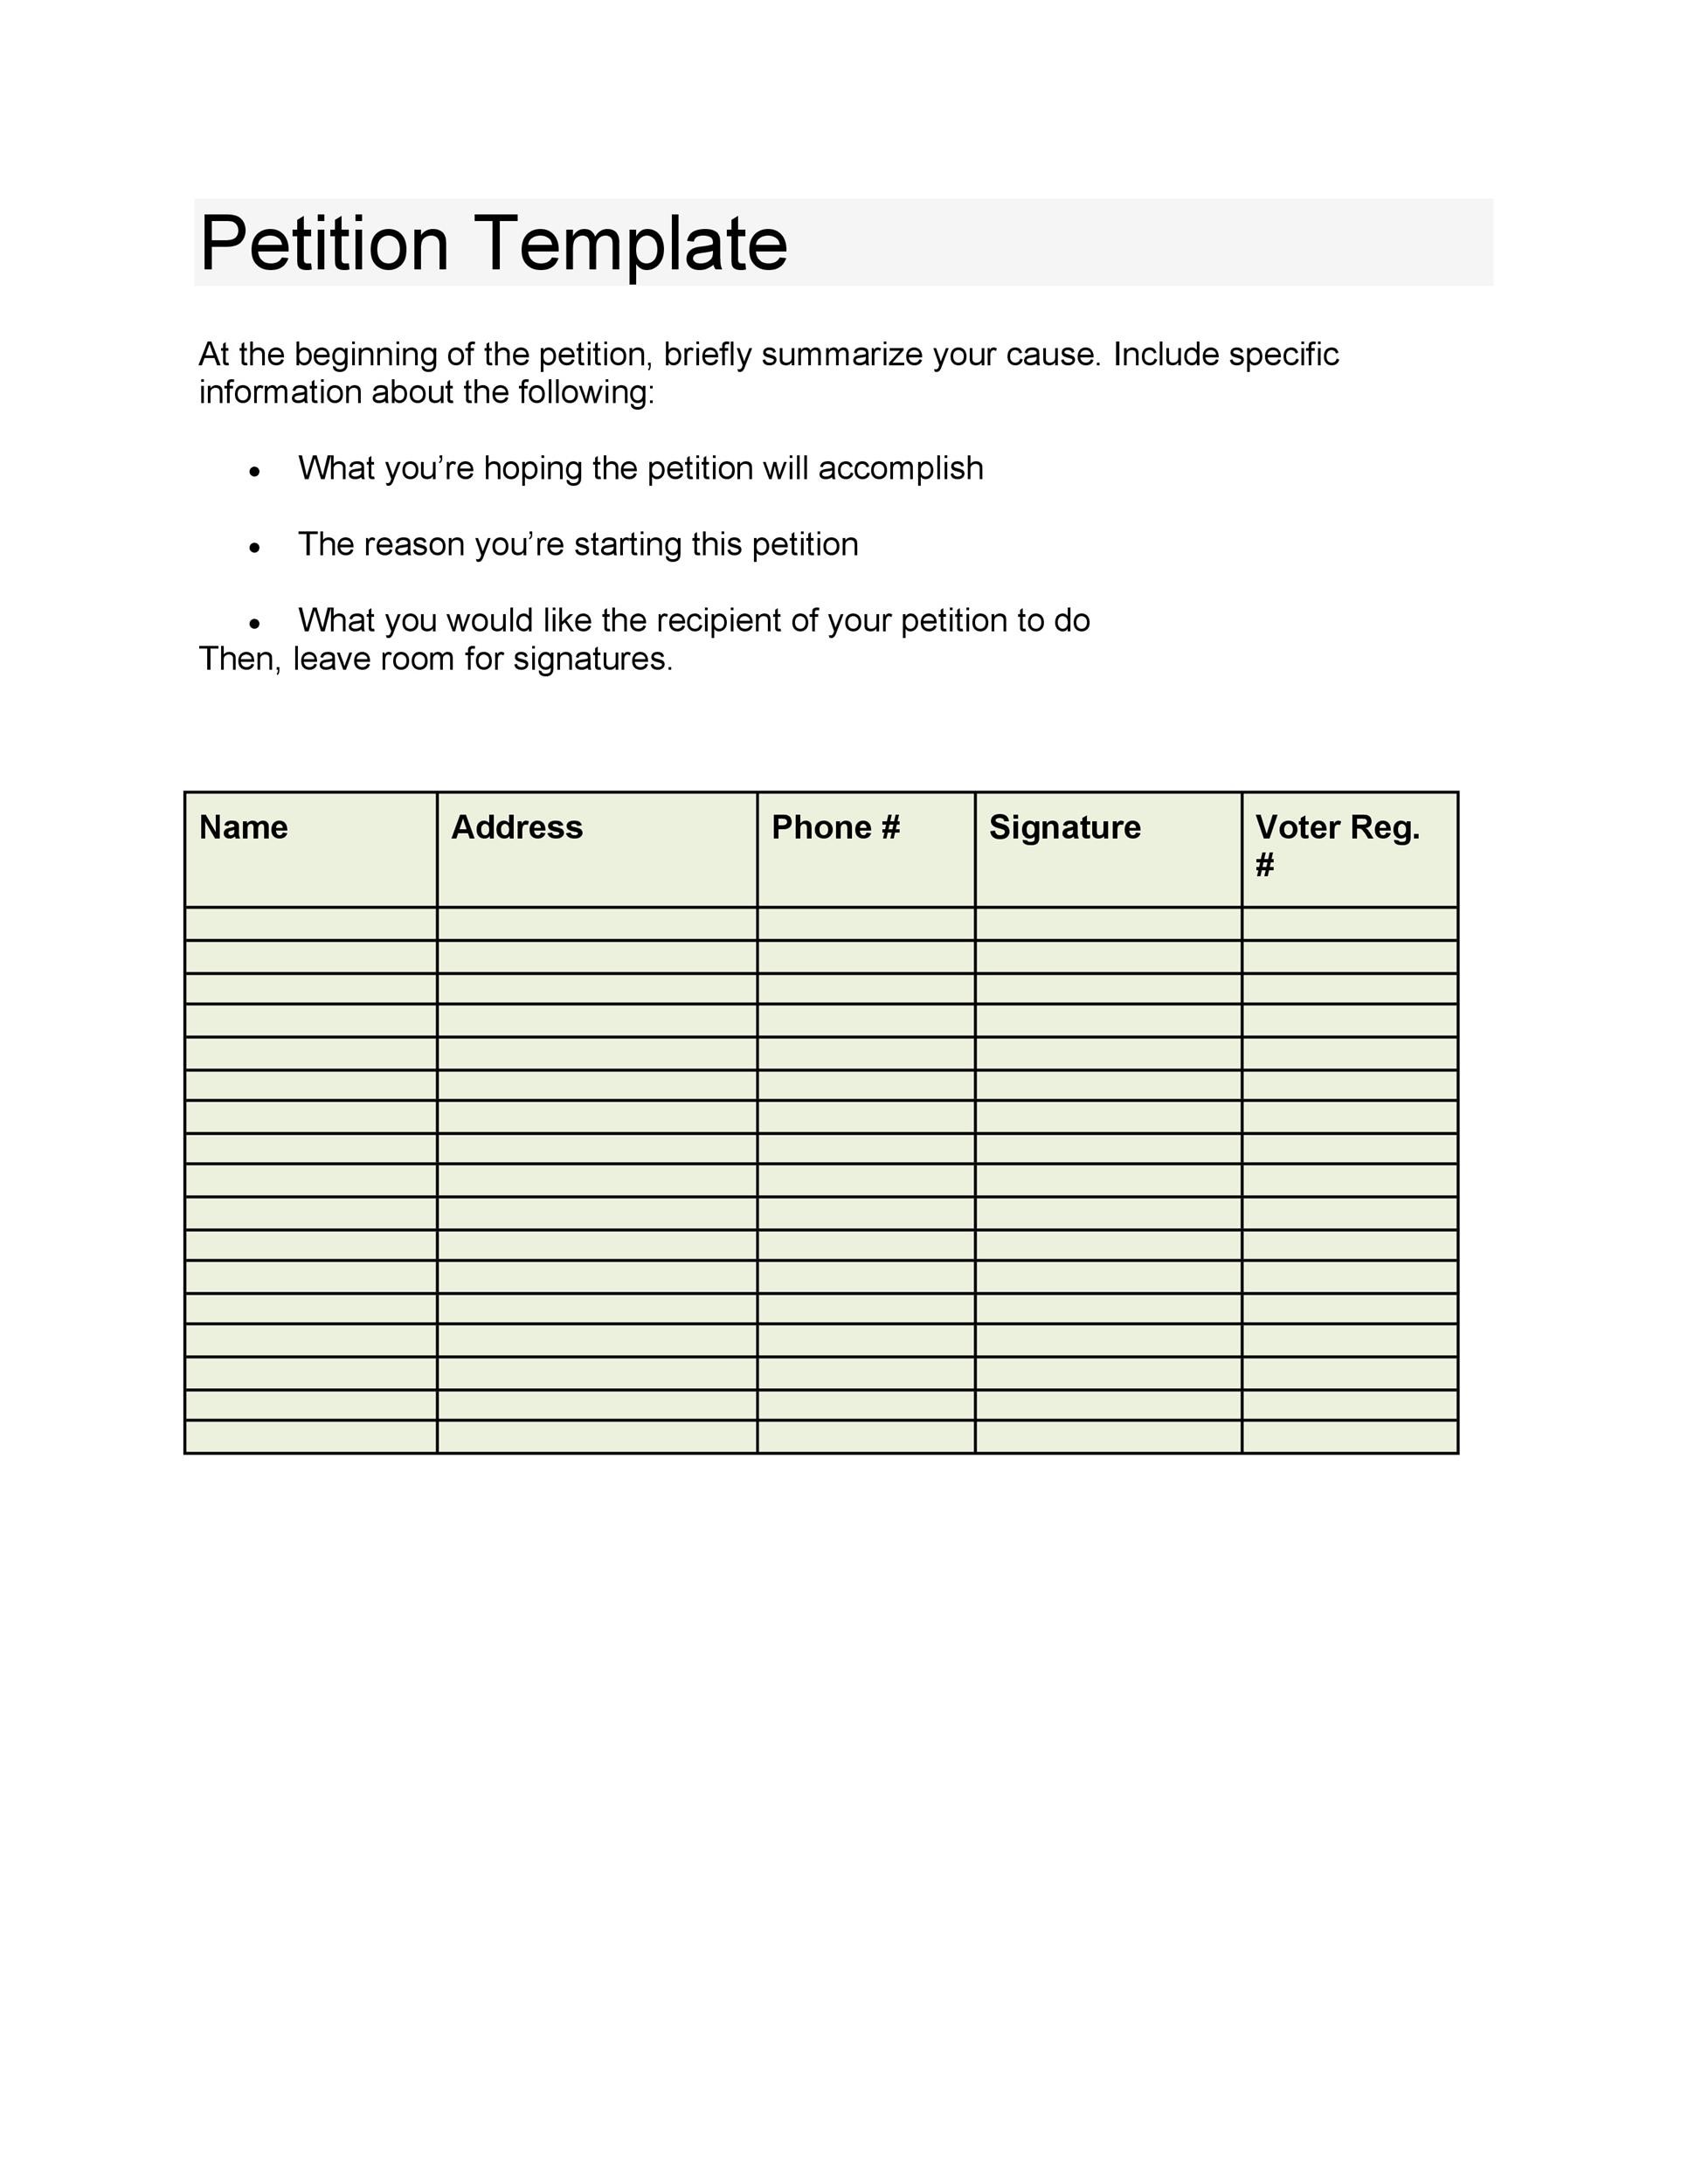 Free Petition template 19